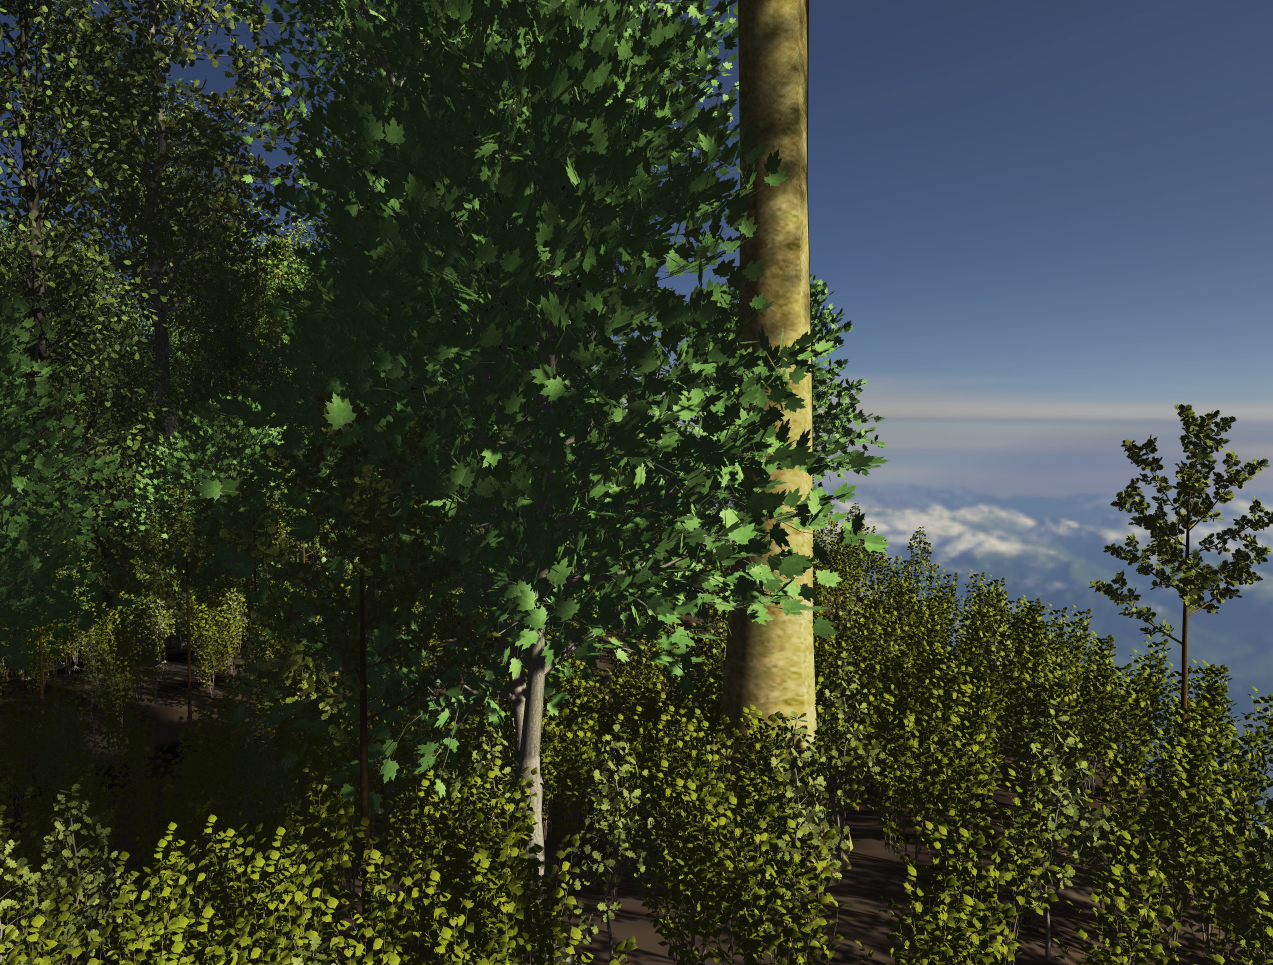 Realistic and Interactive Visualization of High-Density Plant Ecosystems